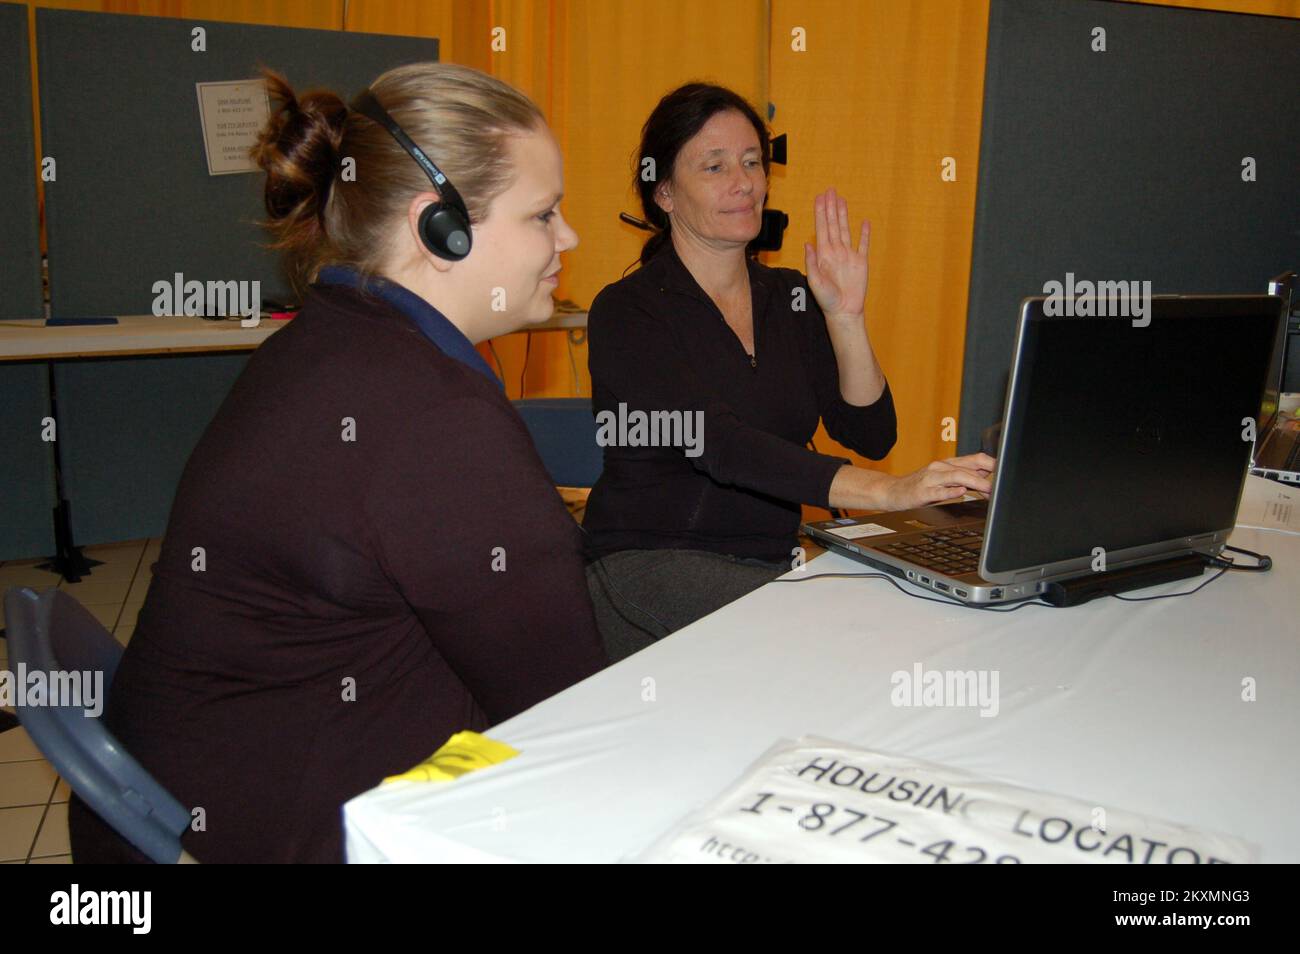 Flooding   Hurricane/Tropical Storm   Severe Storm - Harrisburg, Pa. , October 13, 2011   Debi Chrisbacker (R) ODHH/FEMA Sign Language consultant and Christell Boudreaux, FEMA Applicant Services Team Lead, demonstrate the use of Video Remote Interpreting (VRI) a new services that FEMA is offering to applicants at the Disaster Recovery Centers. Pennsylvania Tropical Storm Lee. Photographs Relating to Disasters and Emergency Management Programs, Activities, and Officials Stock Photo